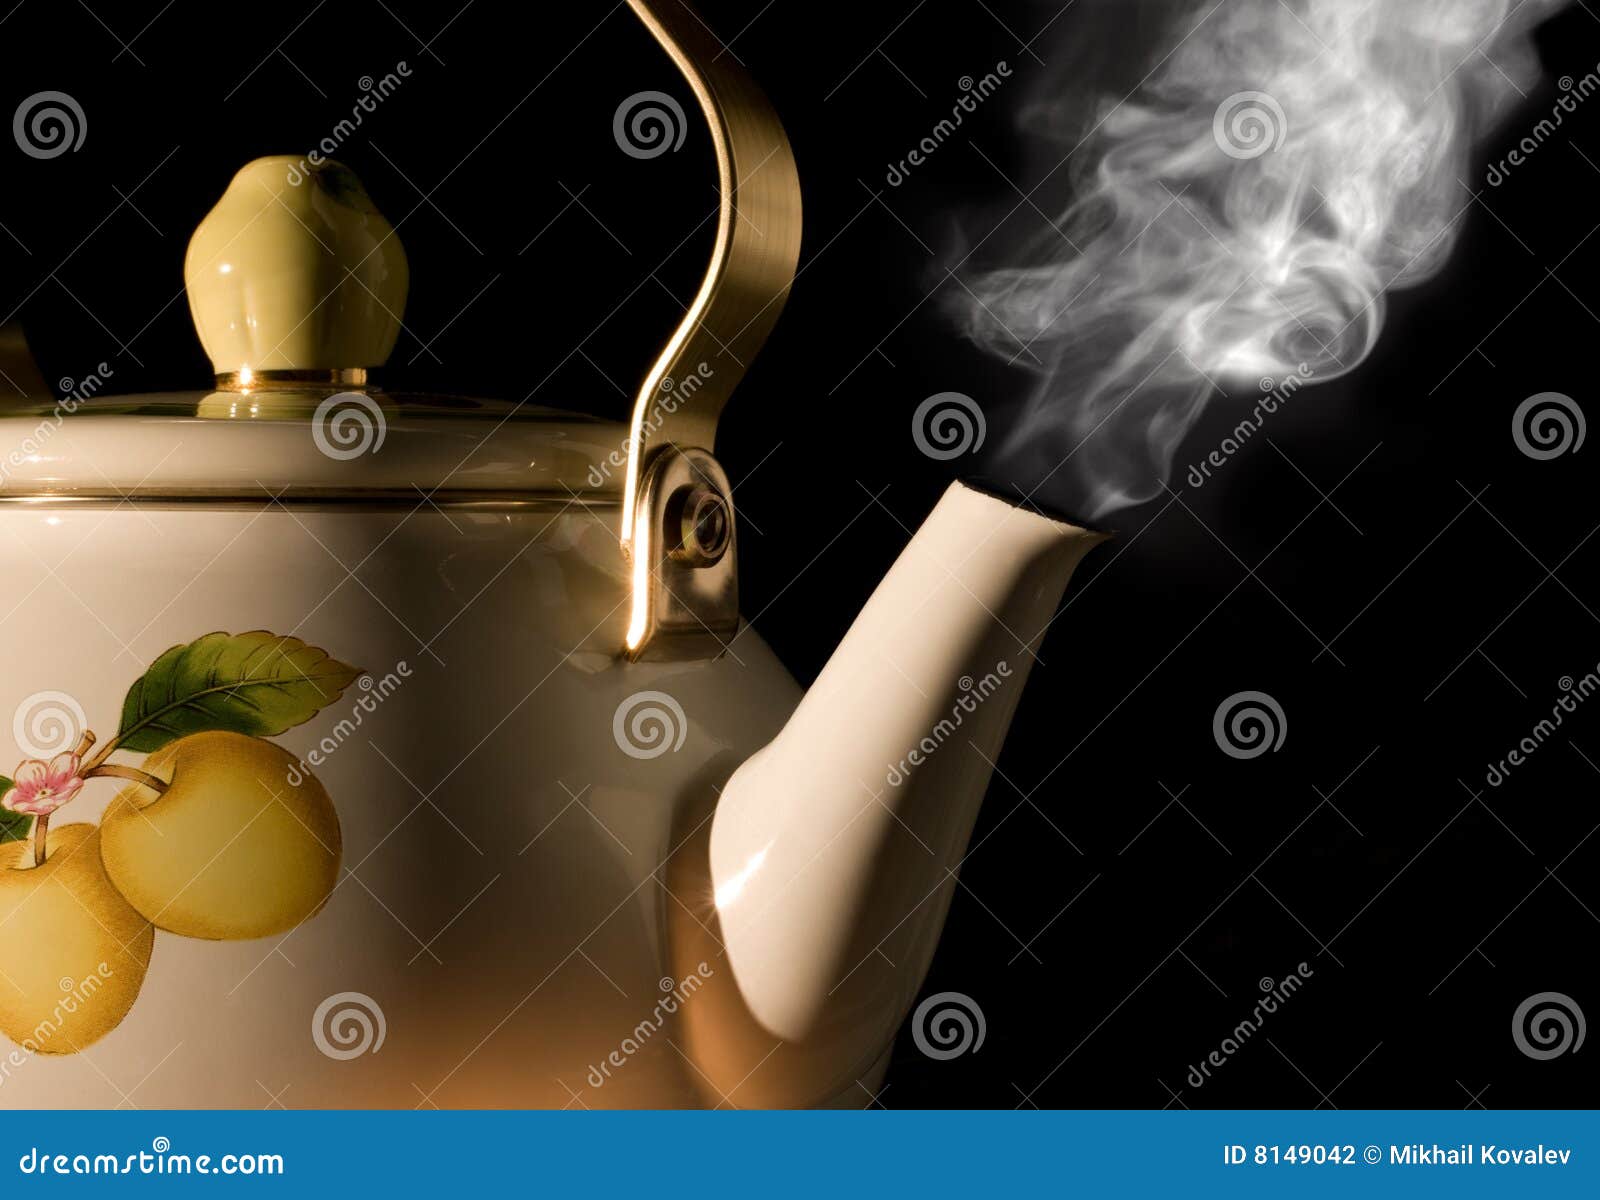 Tea Kettle Steam Stock Photos and Images - 123RF